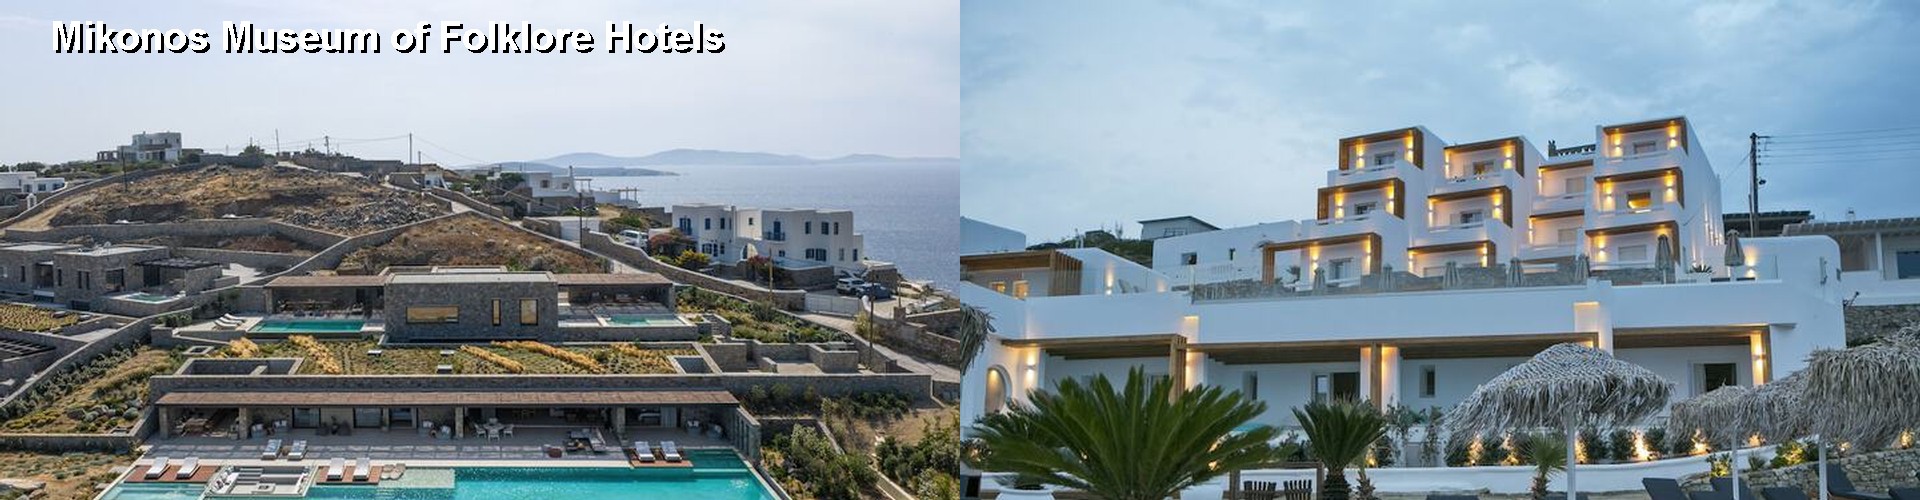 5 Best Hotels near Mikonos Museum of Folklore